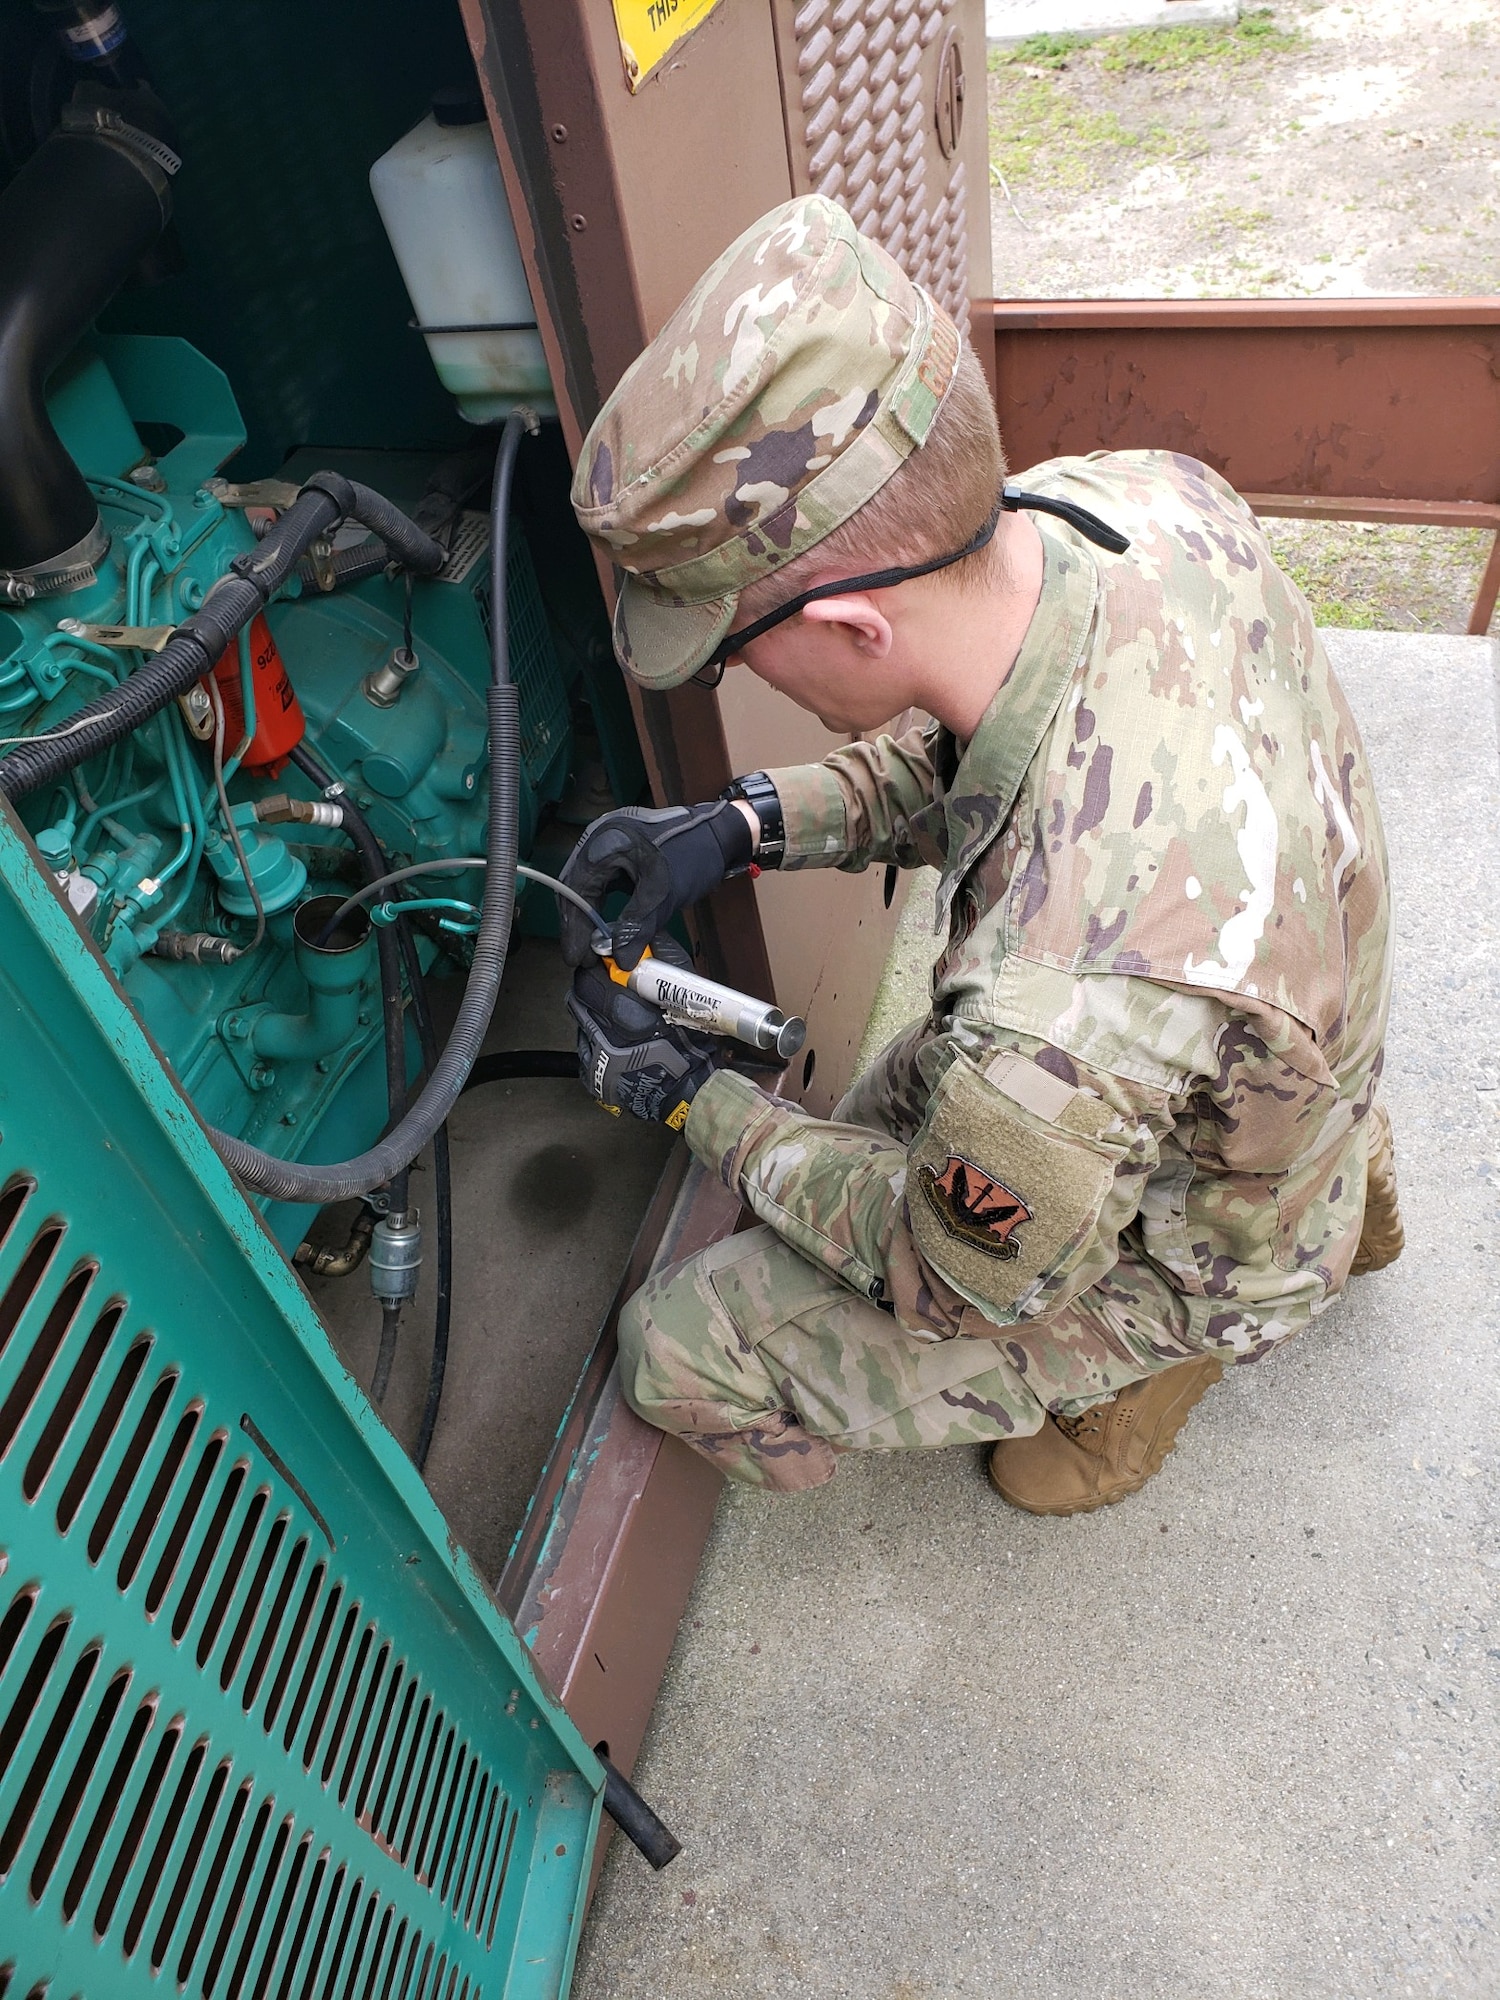 A simple change in Air Force oil change procedures may save the Air Force over $1 million per year, while also helping protect the environment.